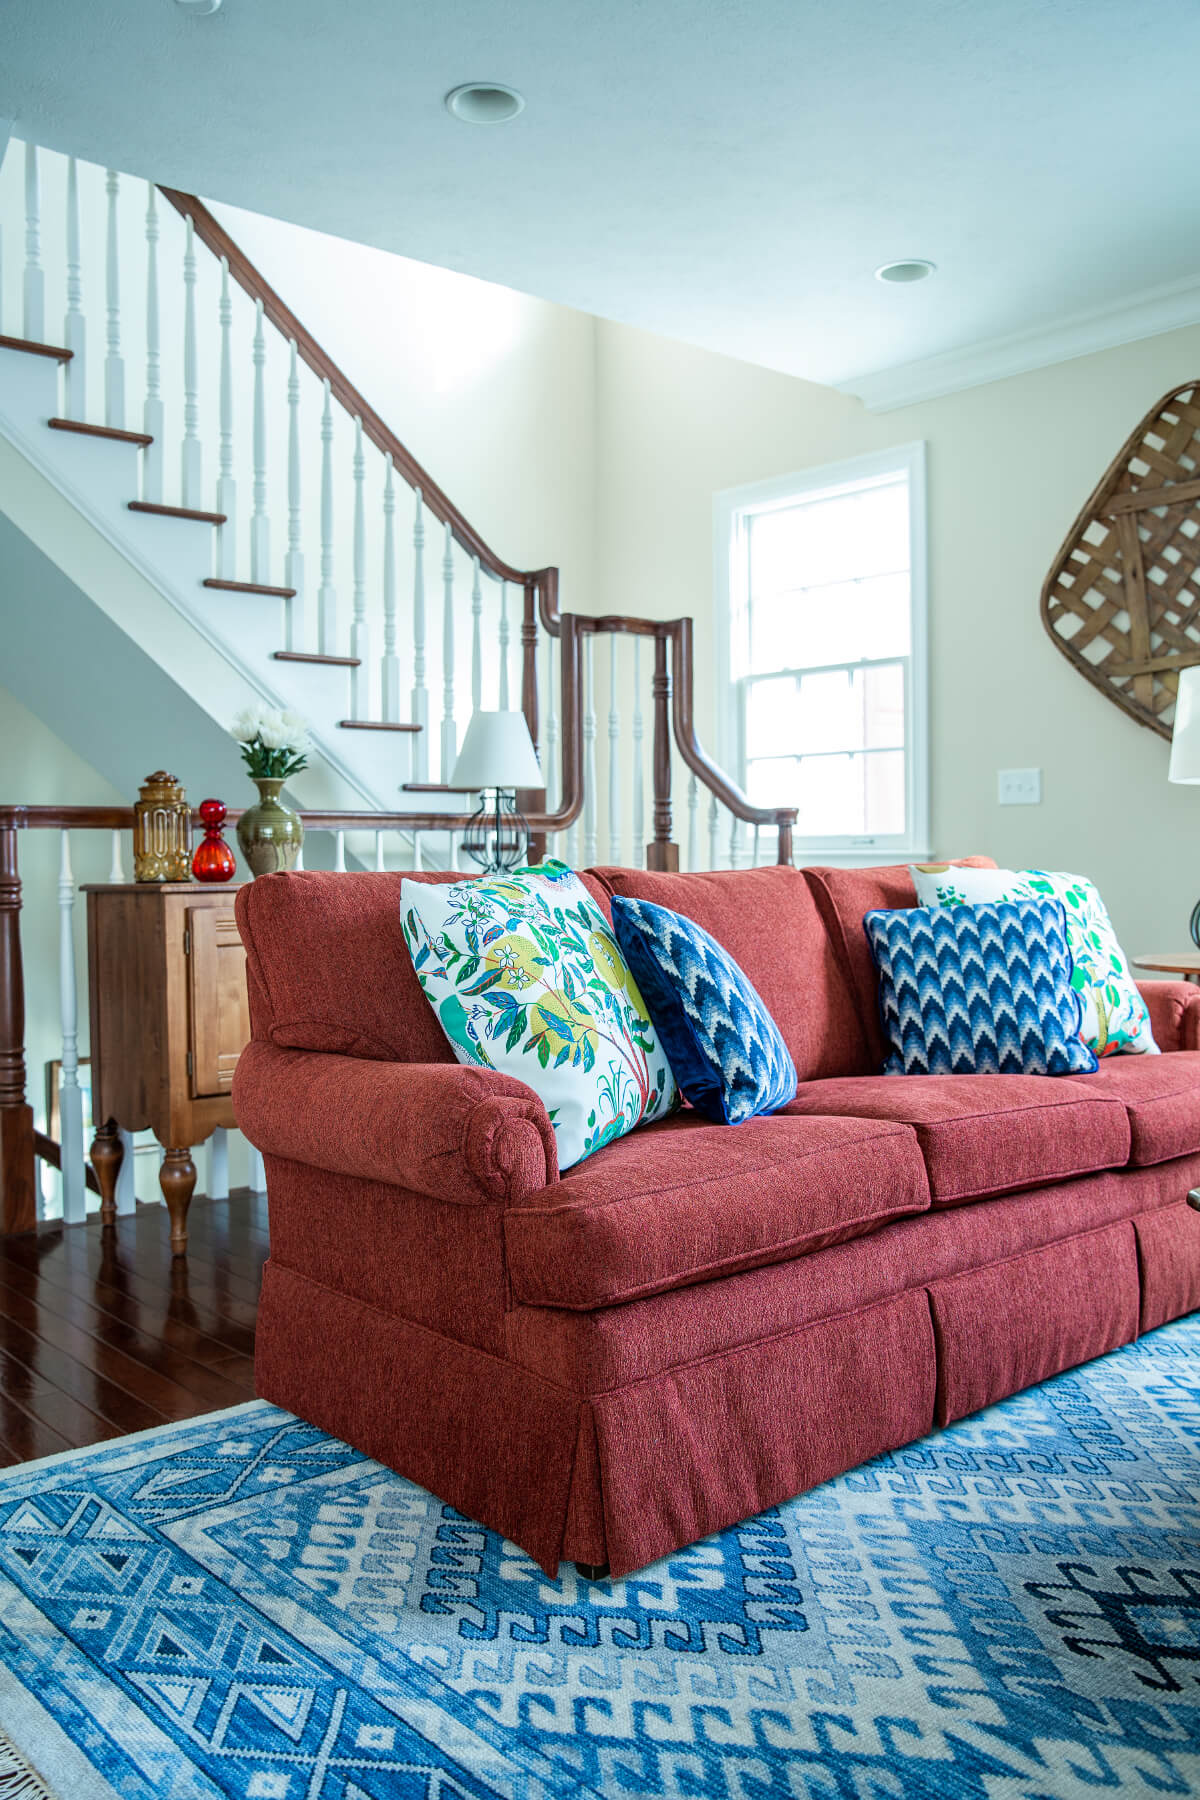 This is the same sofa, reupholstered for a brand new look! Lindsey Putzier Design Studio